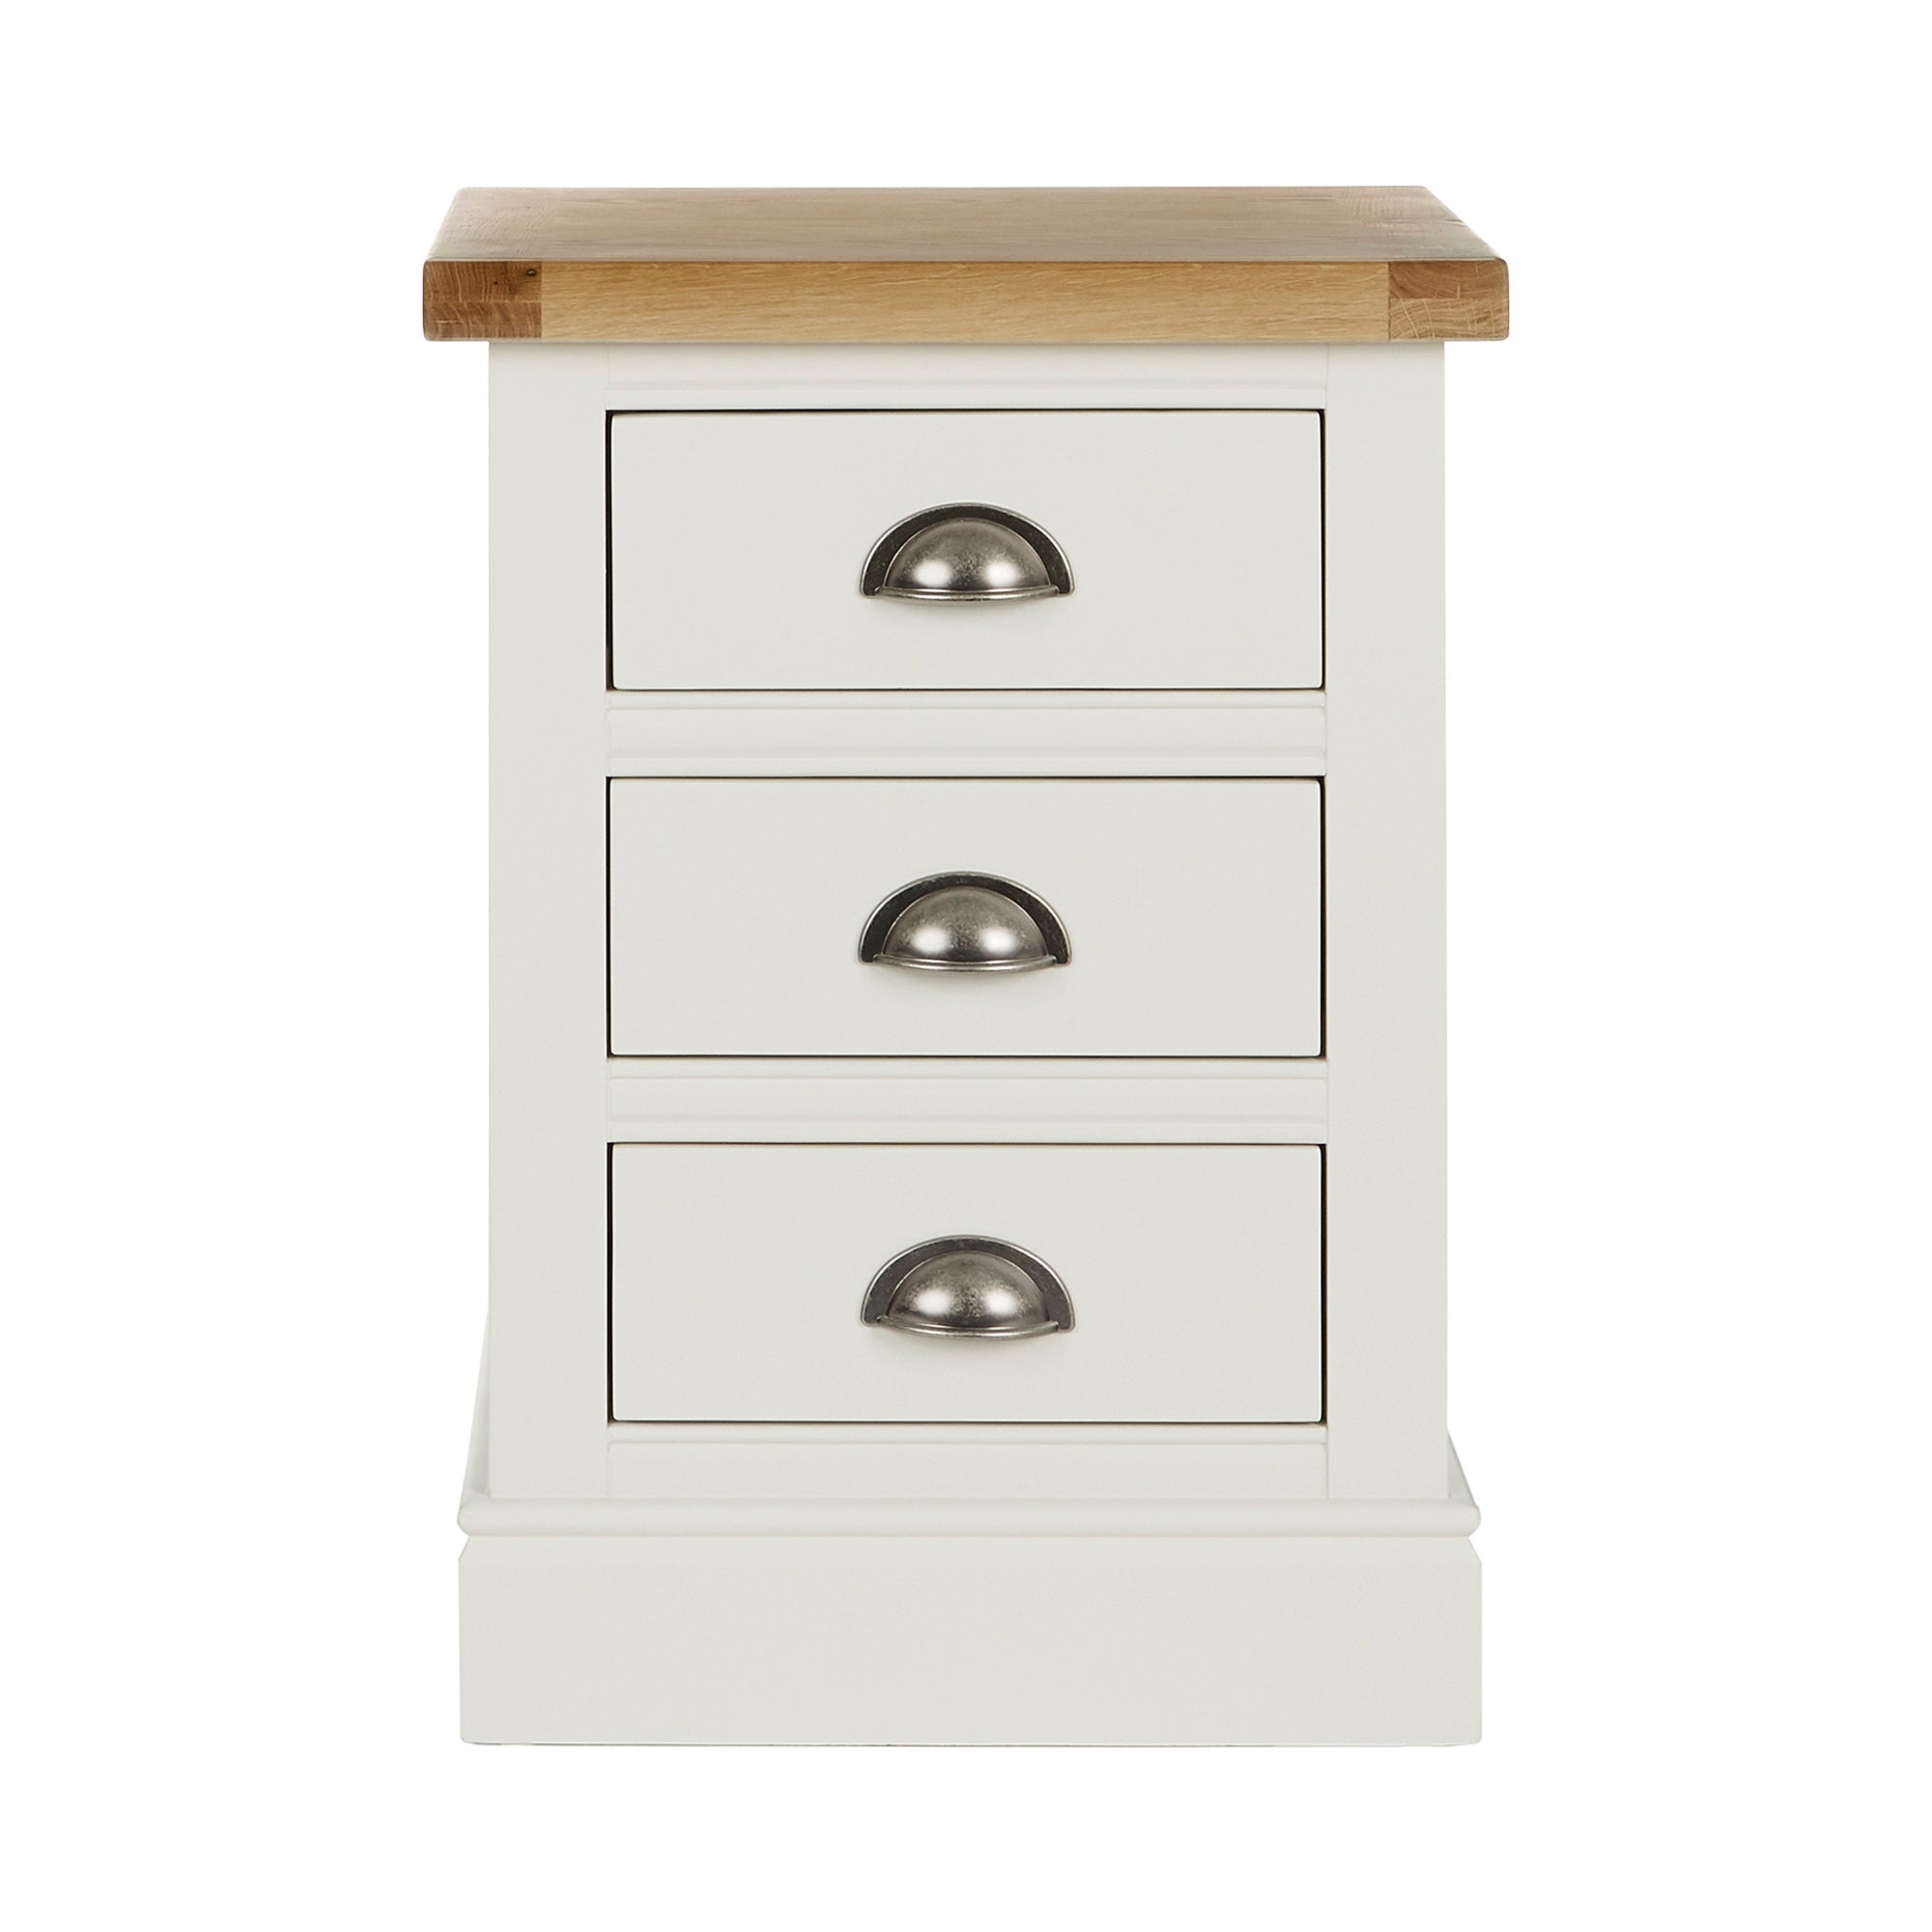 Compton 3 Drawer Bedside Table, Ivory & Oak Cream and Brown